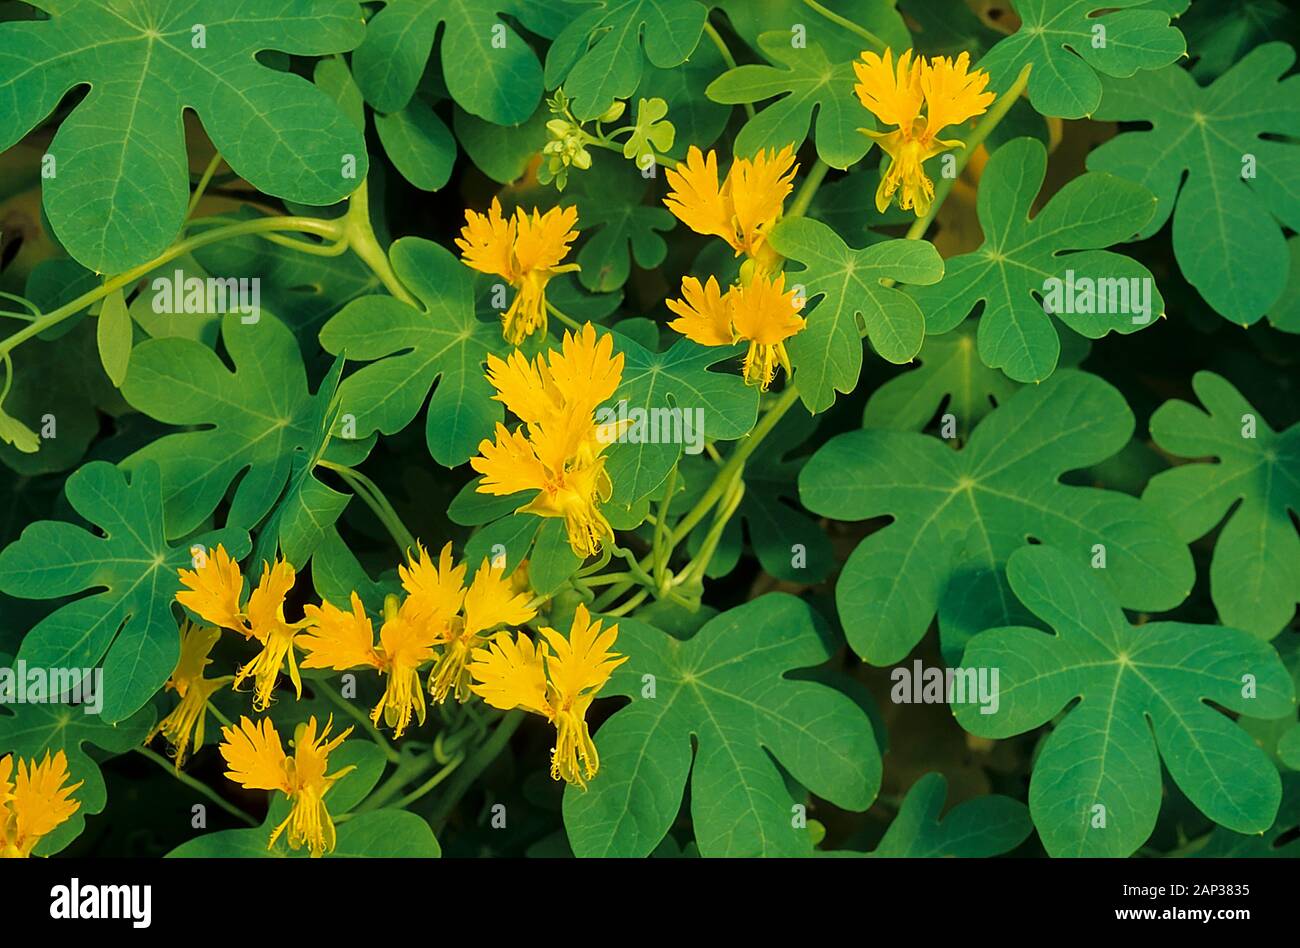 Tropaeolum canariense or Tropaeolum peregrinum Canary Creeper. A fast growing perennial climber with bright yellow flowers in summer and autumn. Stock Photo